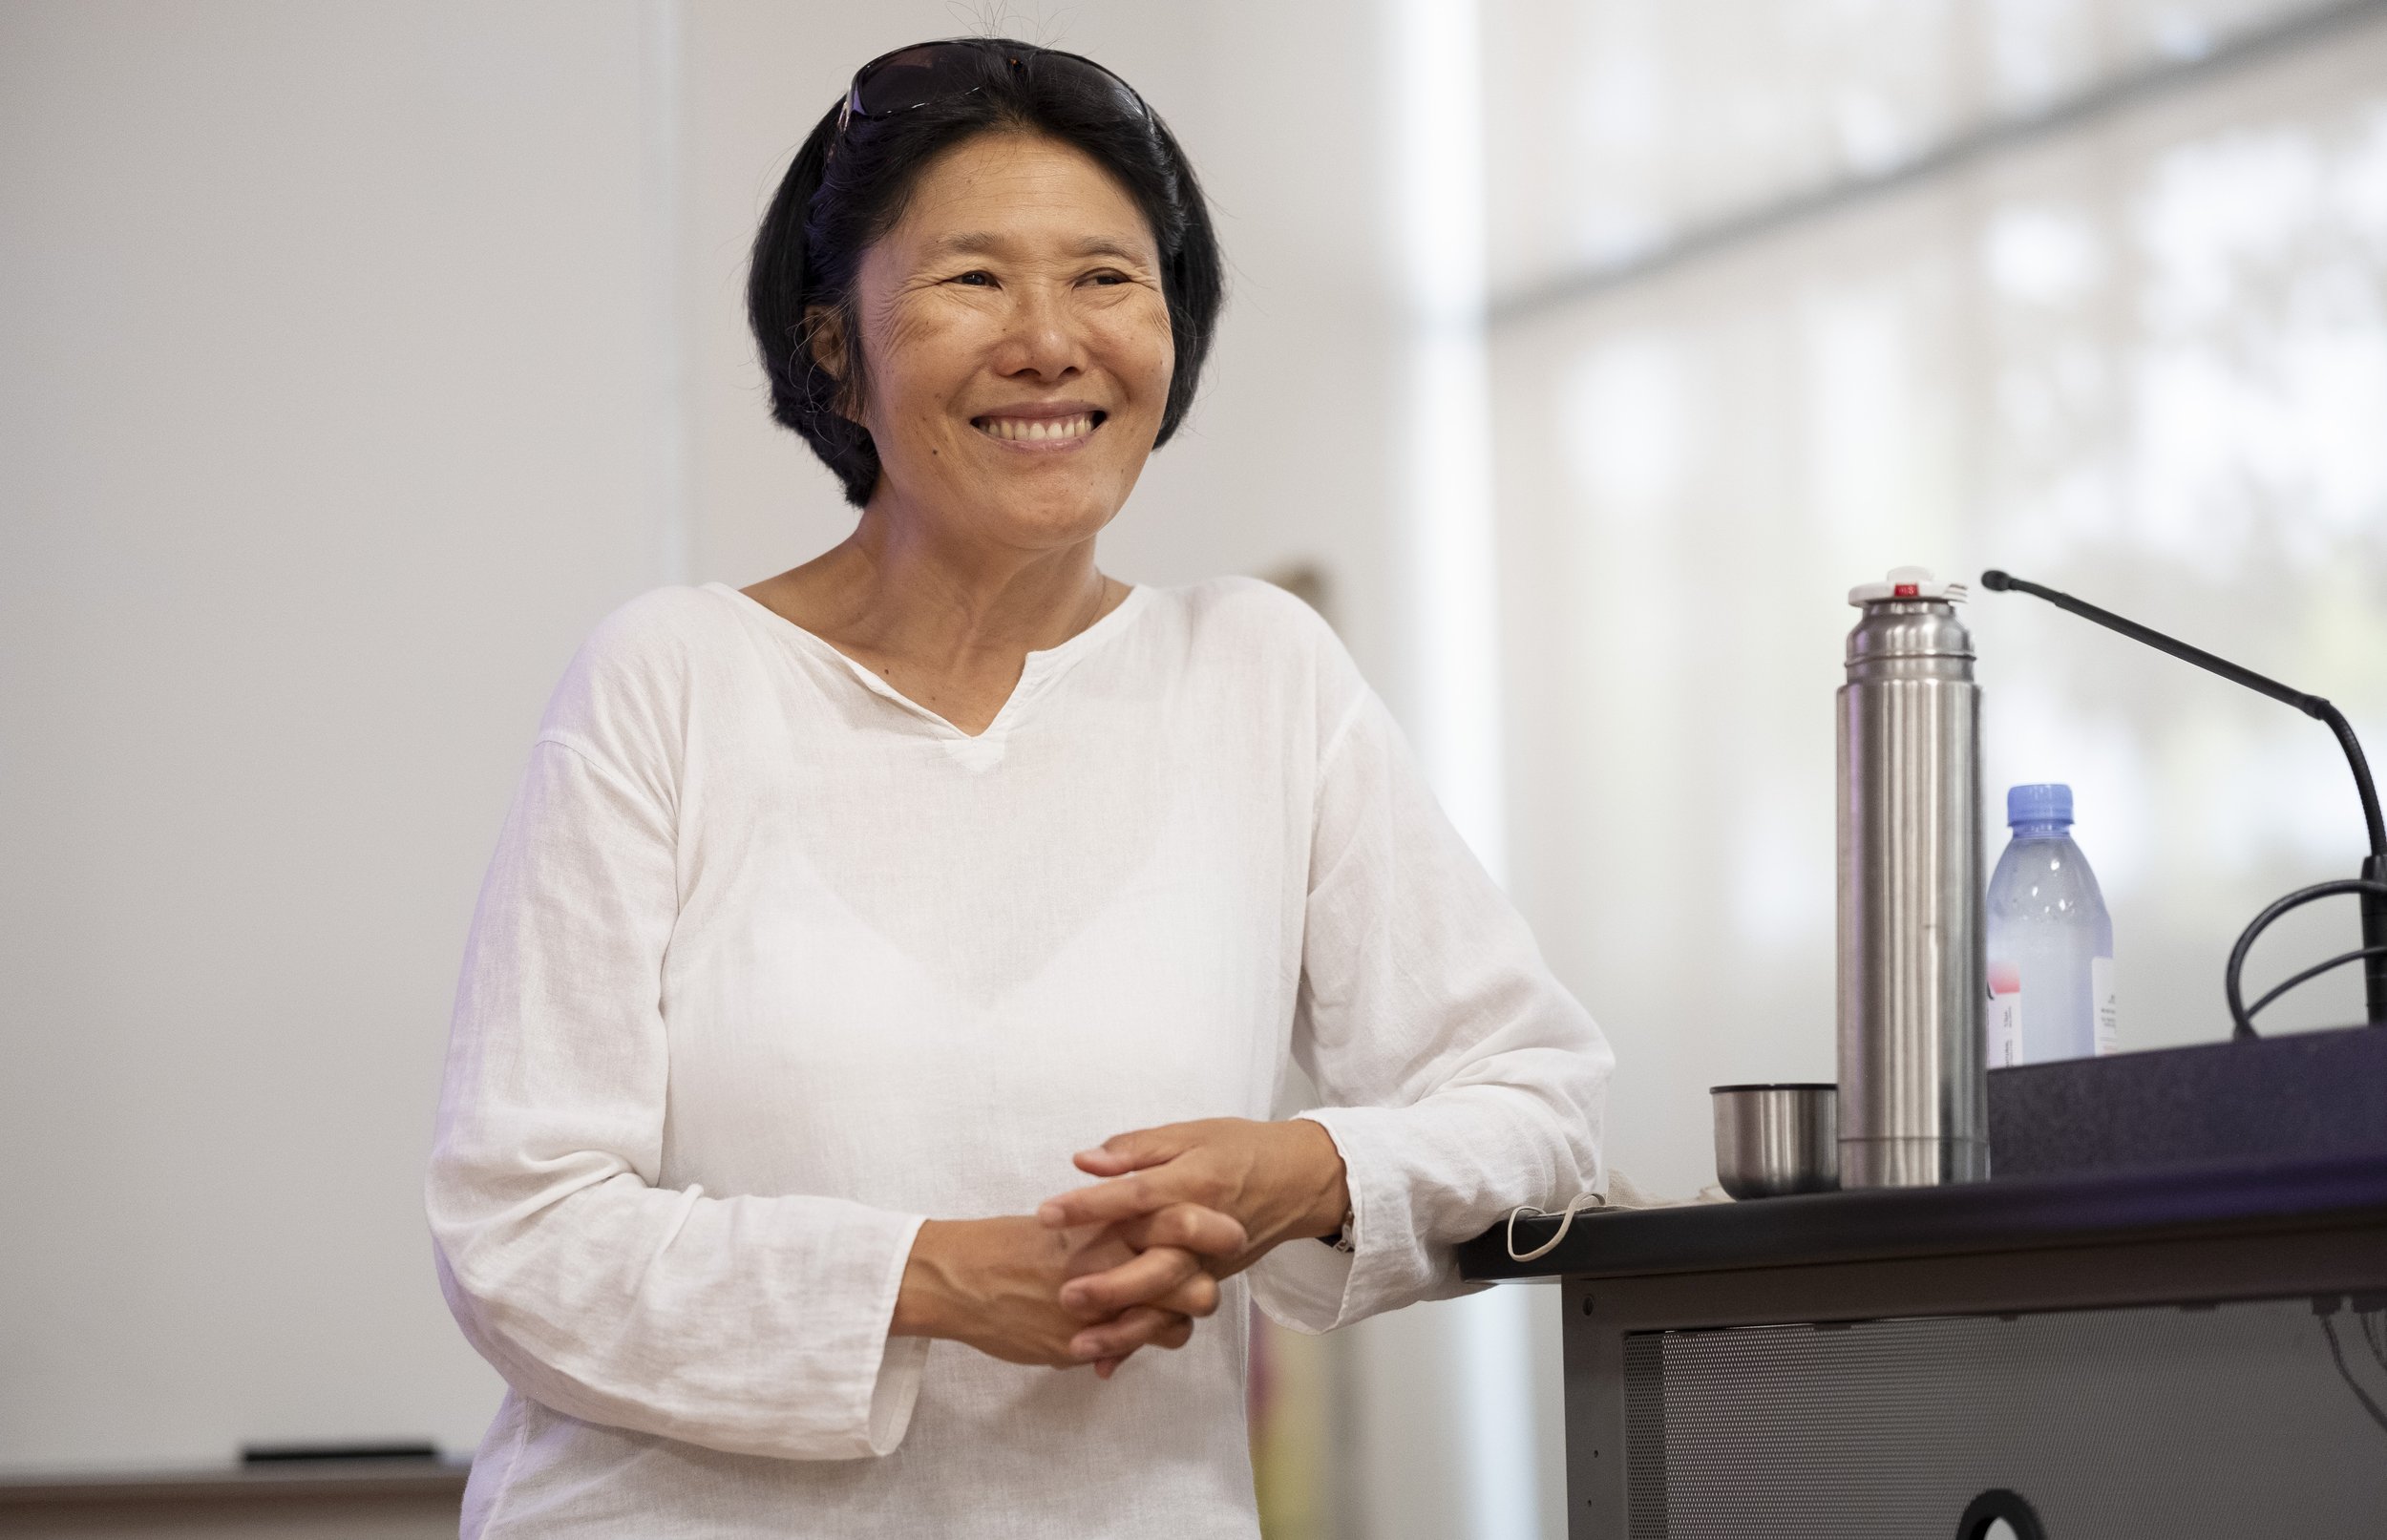  Documentary filmmaker Ann Ann Kaneko answers audience questions in the Humanities & Social Science building at Santa Monica College after screening her film, “Manzanar, Diverted: When Water Becomes Dust” to faculty and students. Thurs. Sept. 14, 202